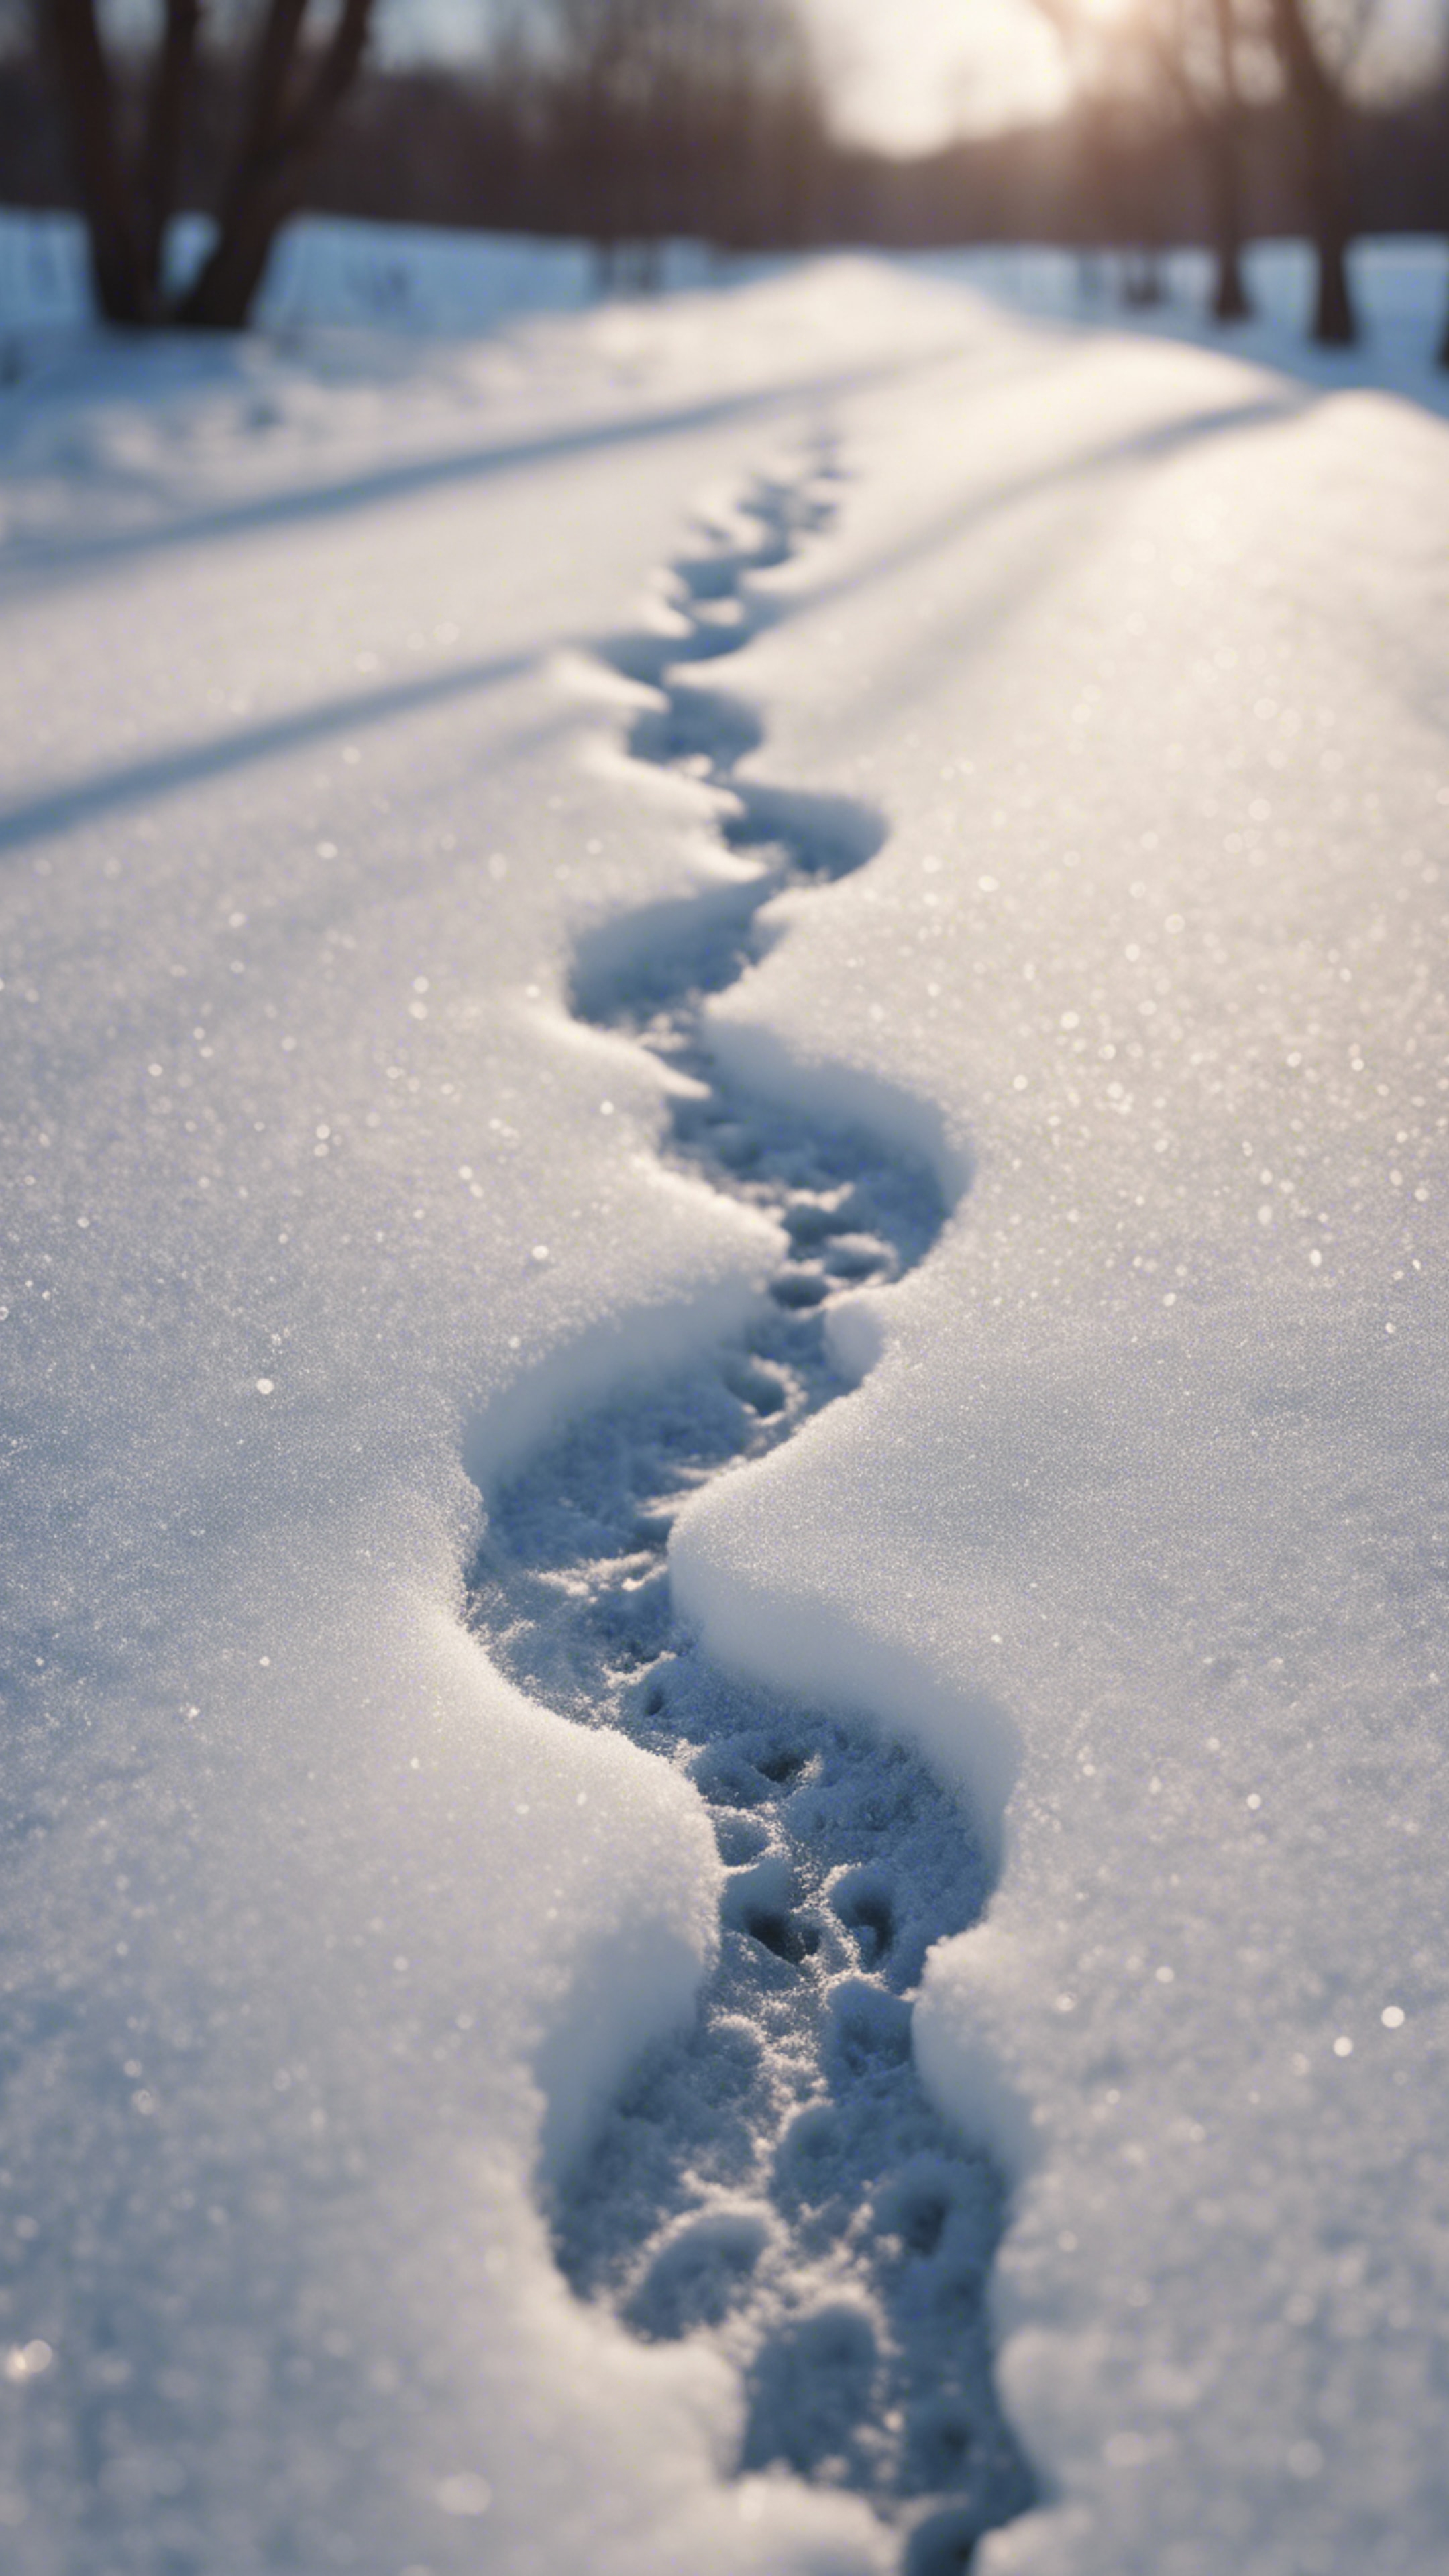 A pair of frosty, heart-shaped footprints imprinted on a snow-covered lane, symbolizing love in winter.壁紙[a9223da6c59742c6a00f]